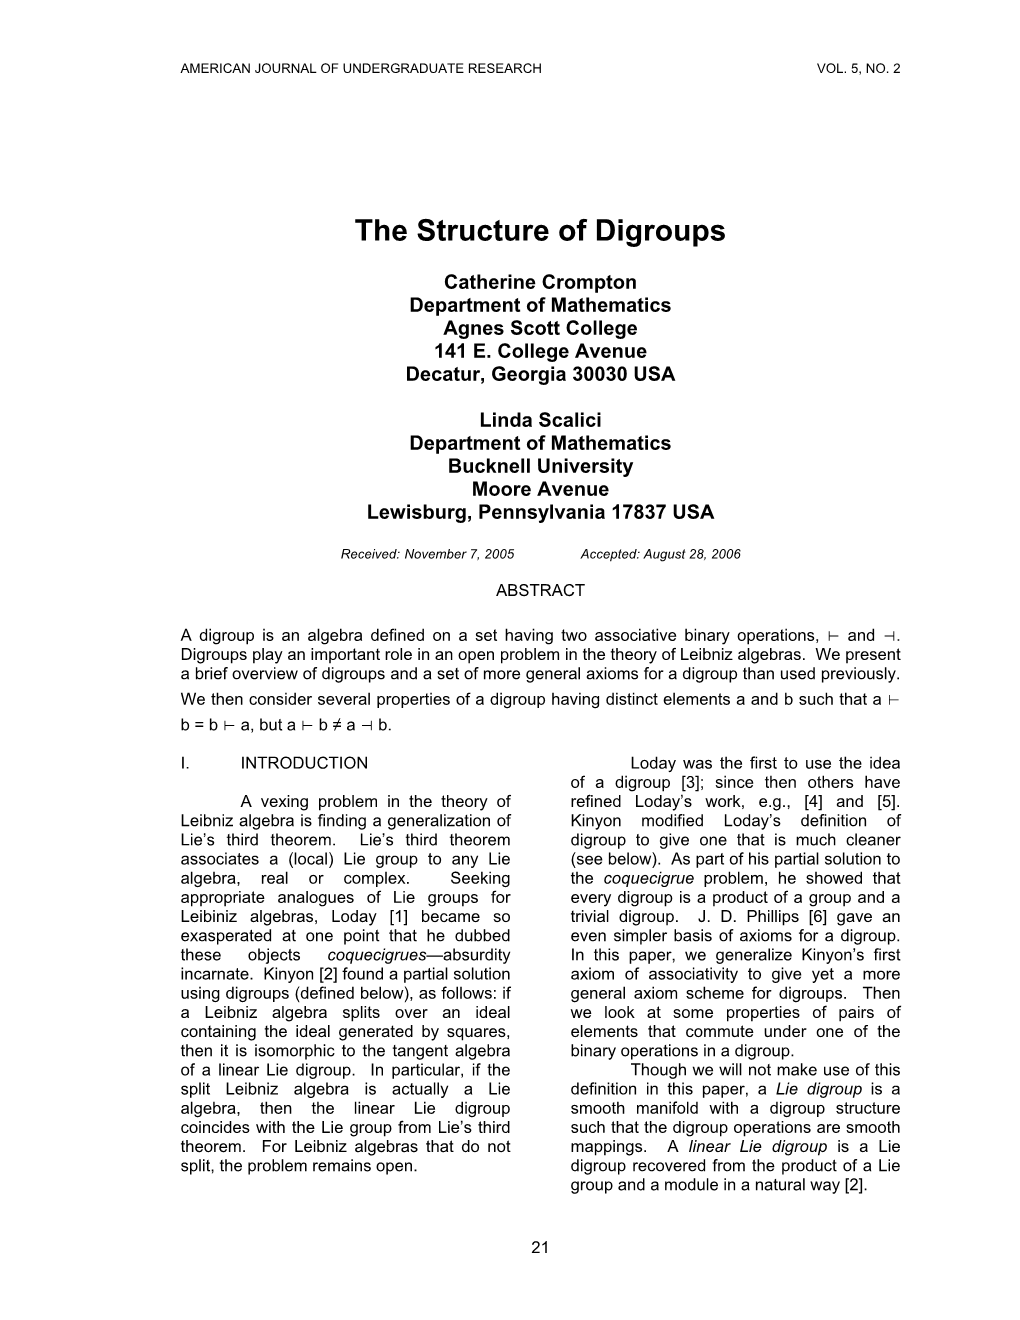 The Structure of Digroups